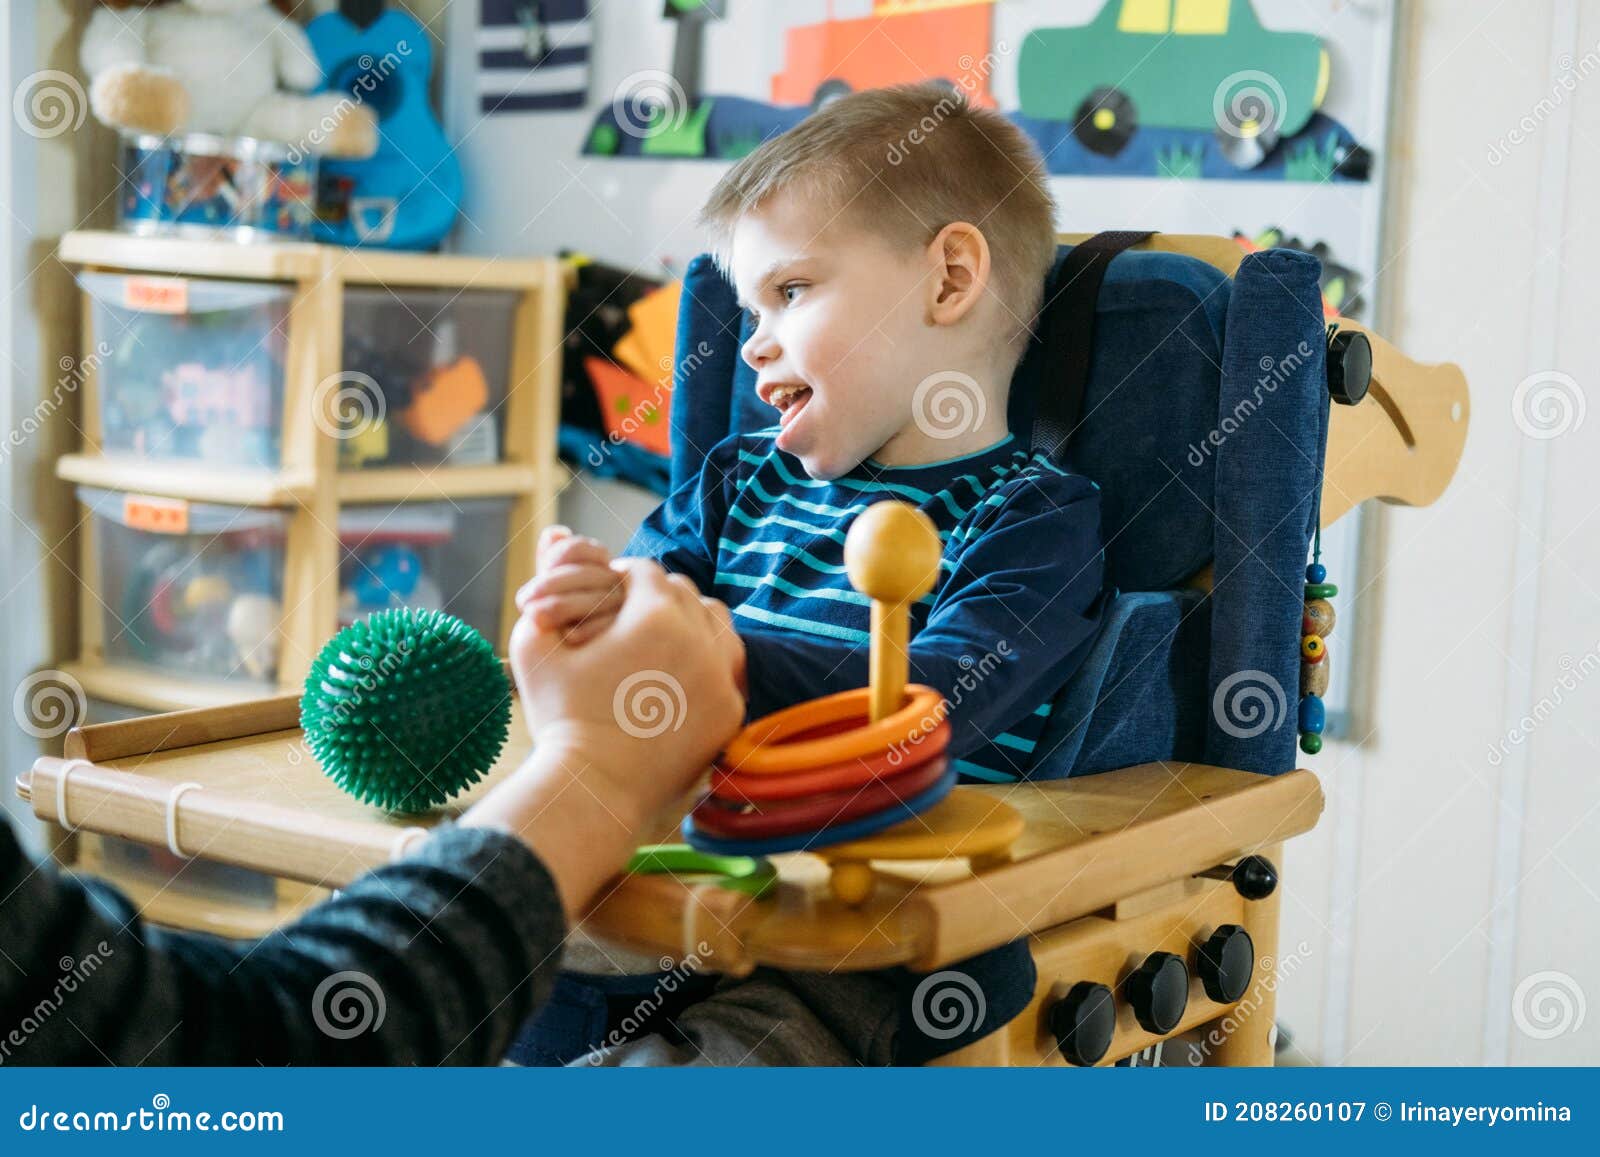 activities for kids with disabilities. preschool activities for children with special needs. boy with with cerebral